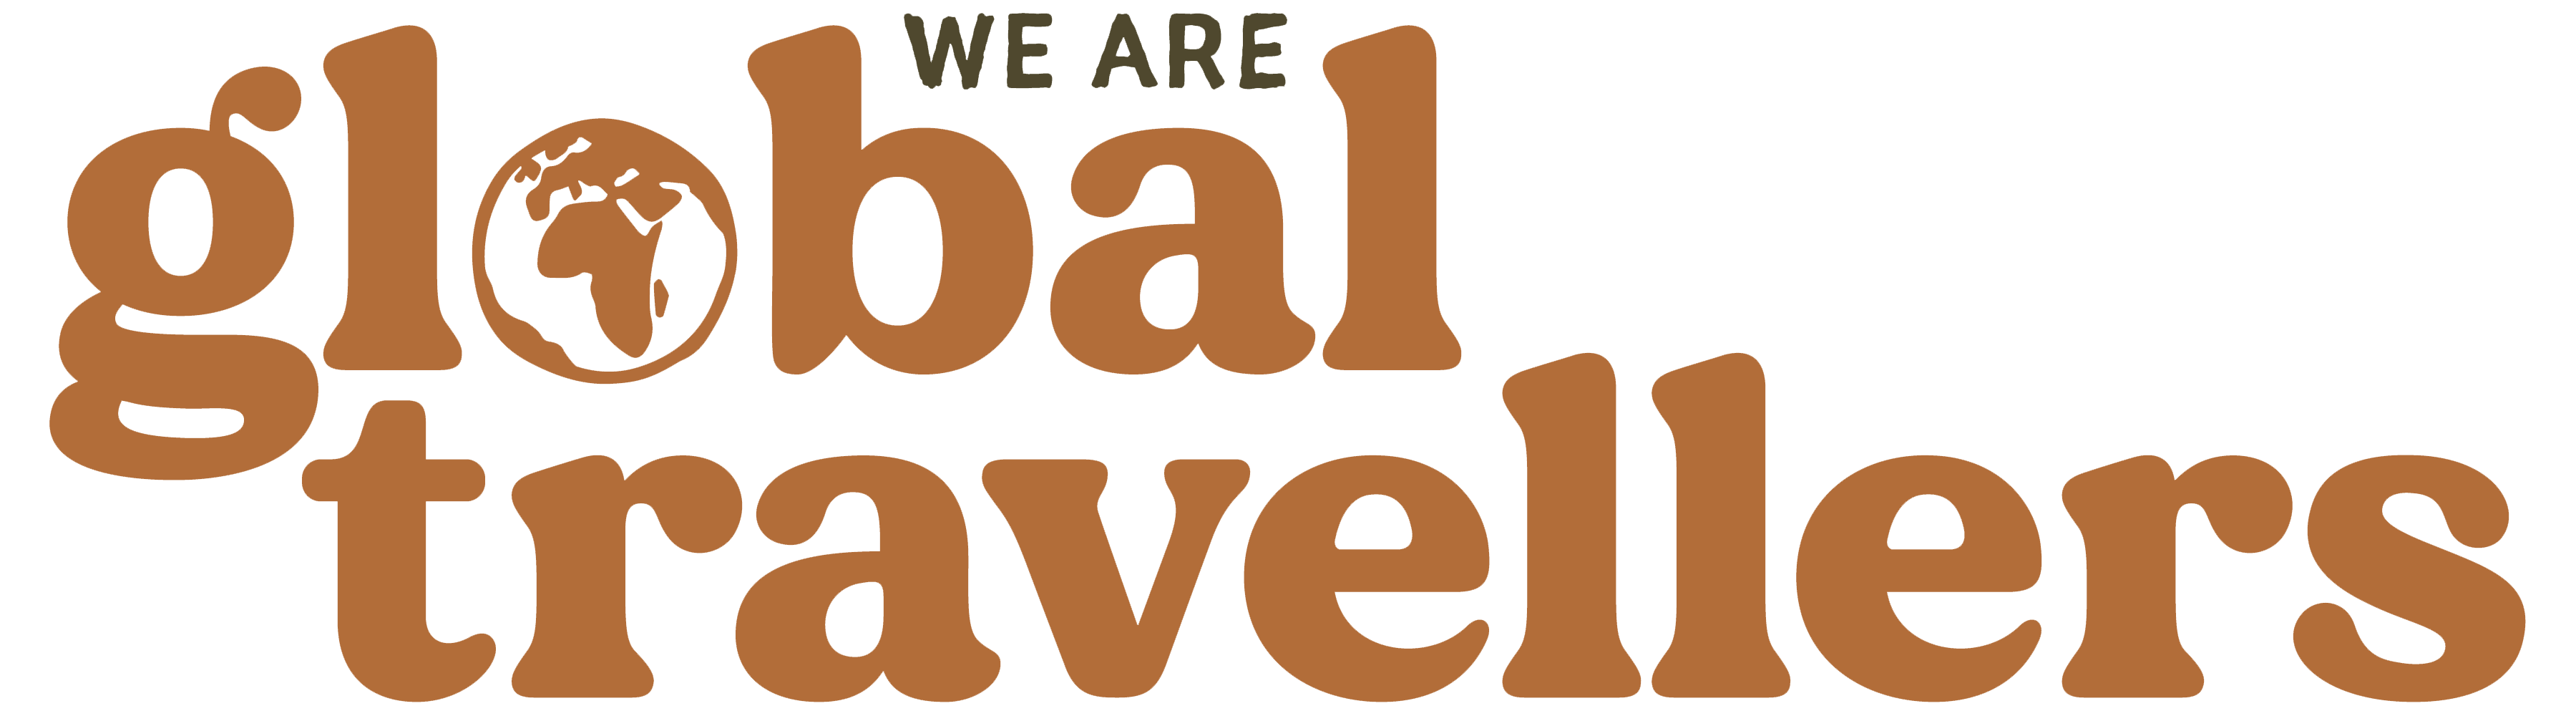 We Are Global Travellers